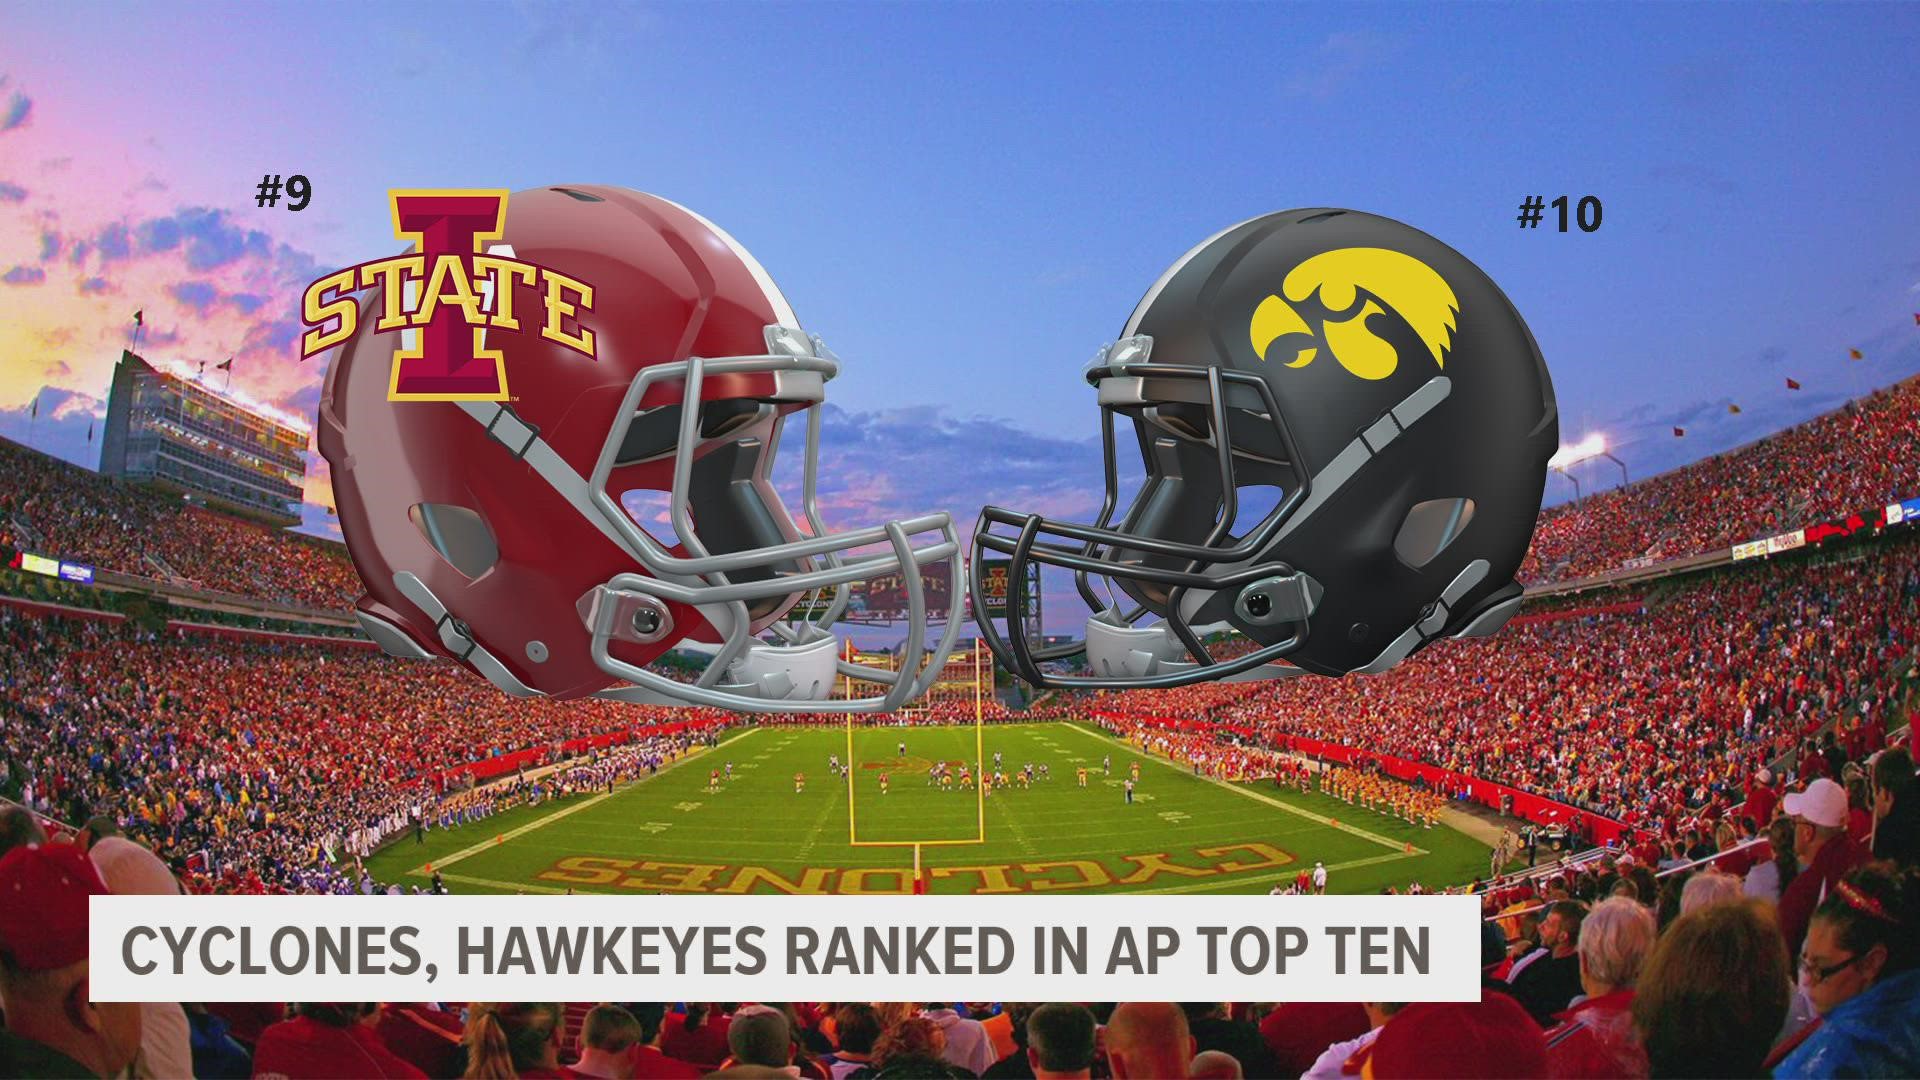 Both teams are in the AP Top 25, Cyclones taking the No. 9 spot and the Hawkeyes taking No. 10.